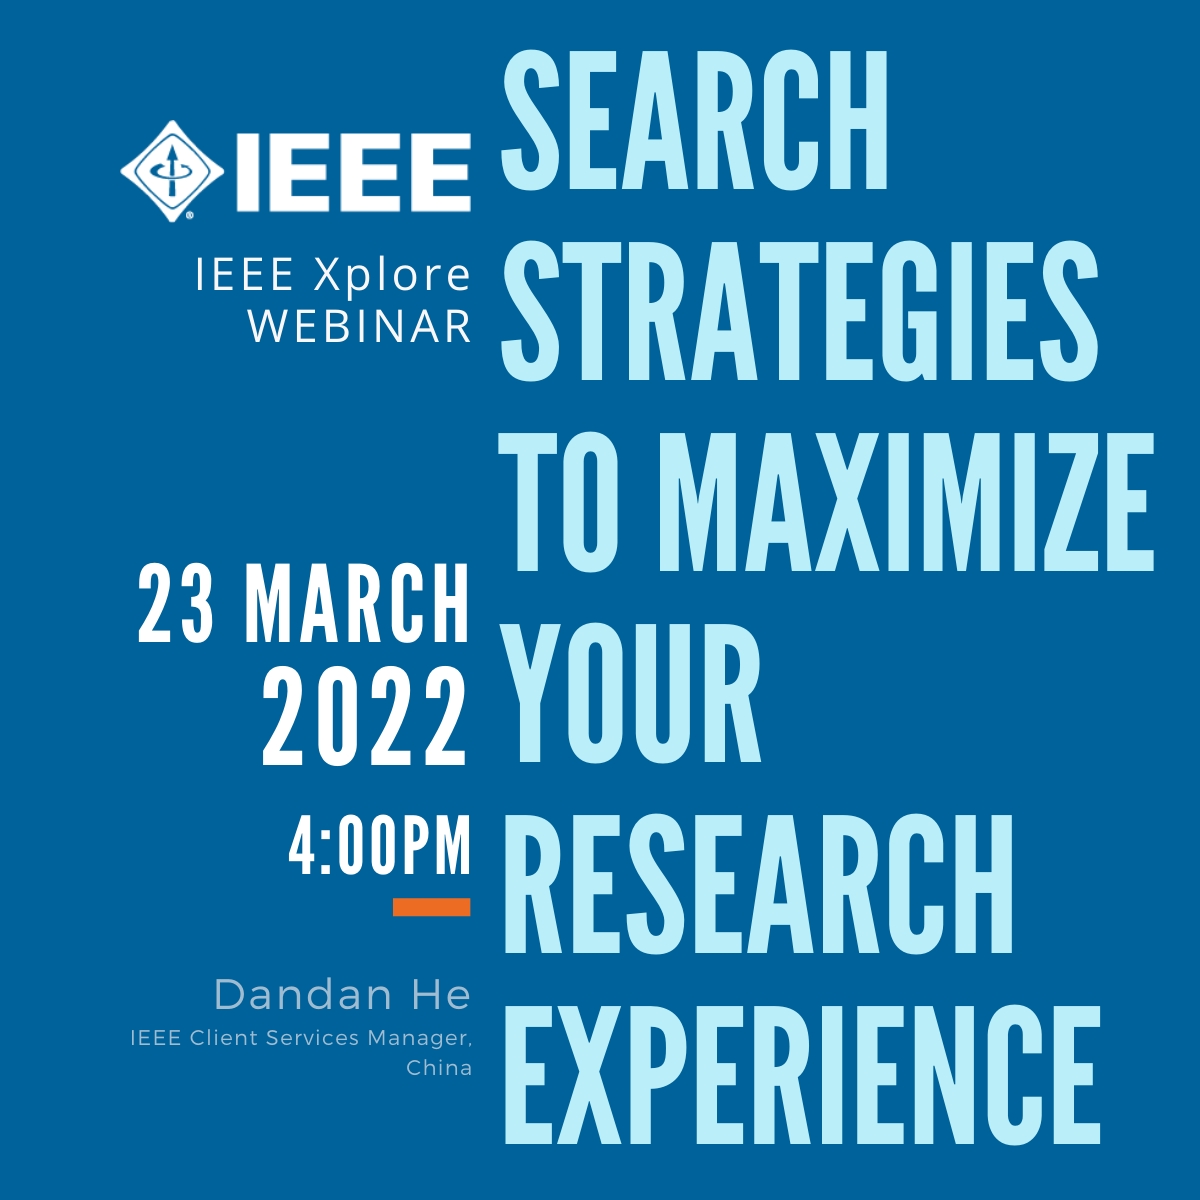 IEEE XPLORE WEBINAR: Search Strategies to Maximize Your Research Experience